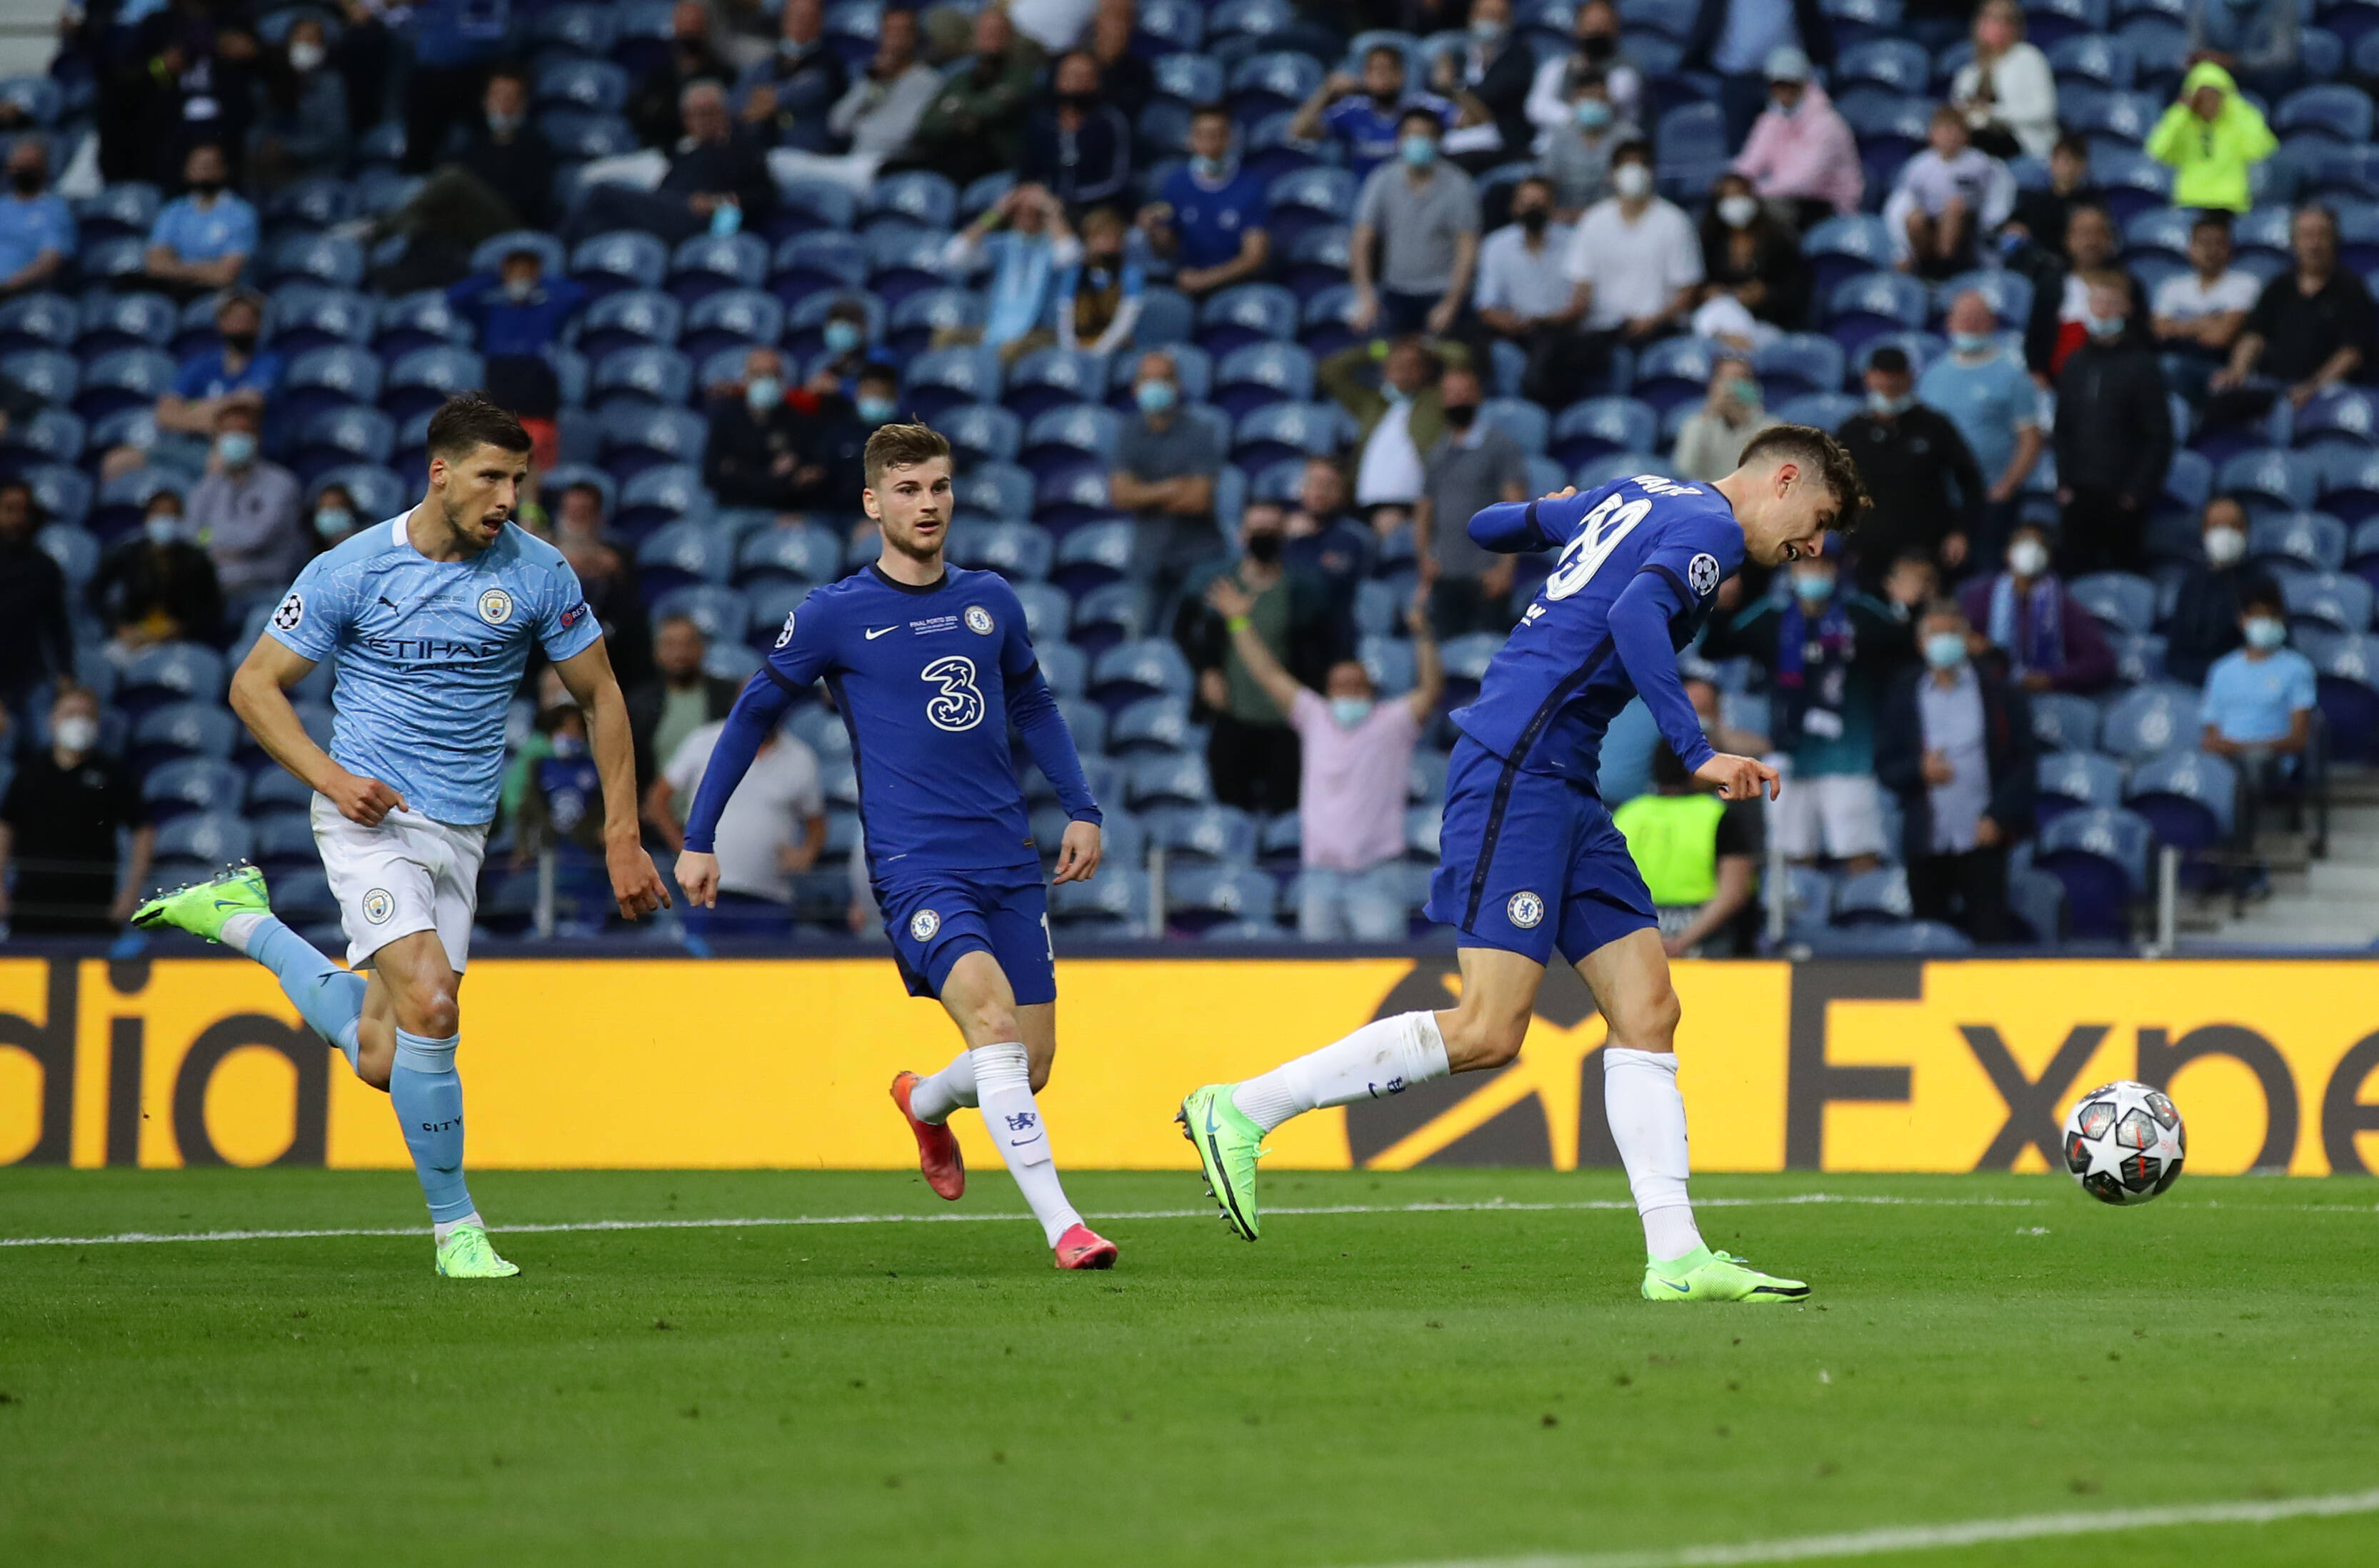 Kai Havertz pictured (right) scoring the winning goal for Chelsea against Manchester City in the 2021 UEFA Champions League final